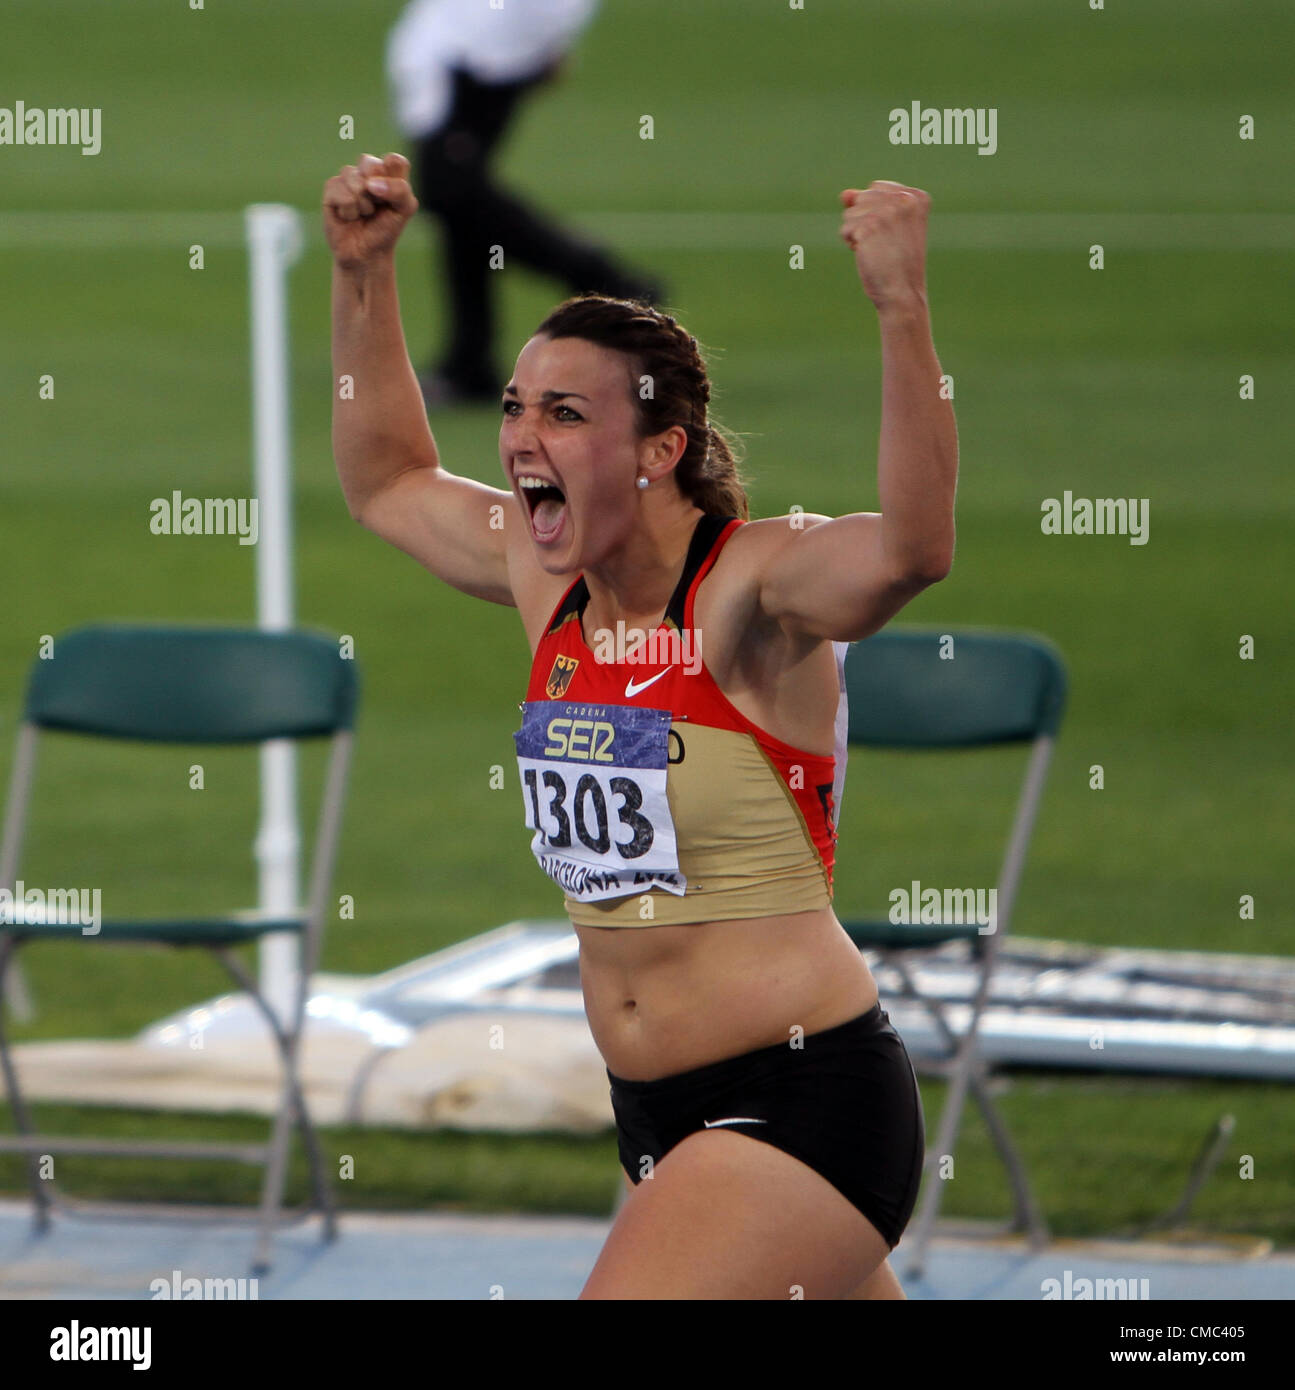 Lena Malkus from Germany - silver medalist of the IAAF World Junior Athletics Championships on July 13, 2012 in Barcelona, Spain. Stock Photo